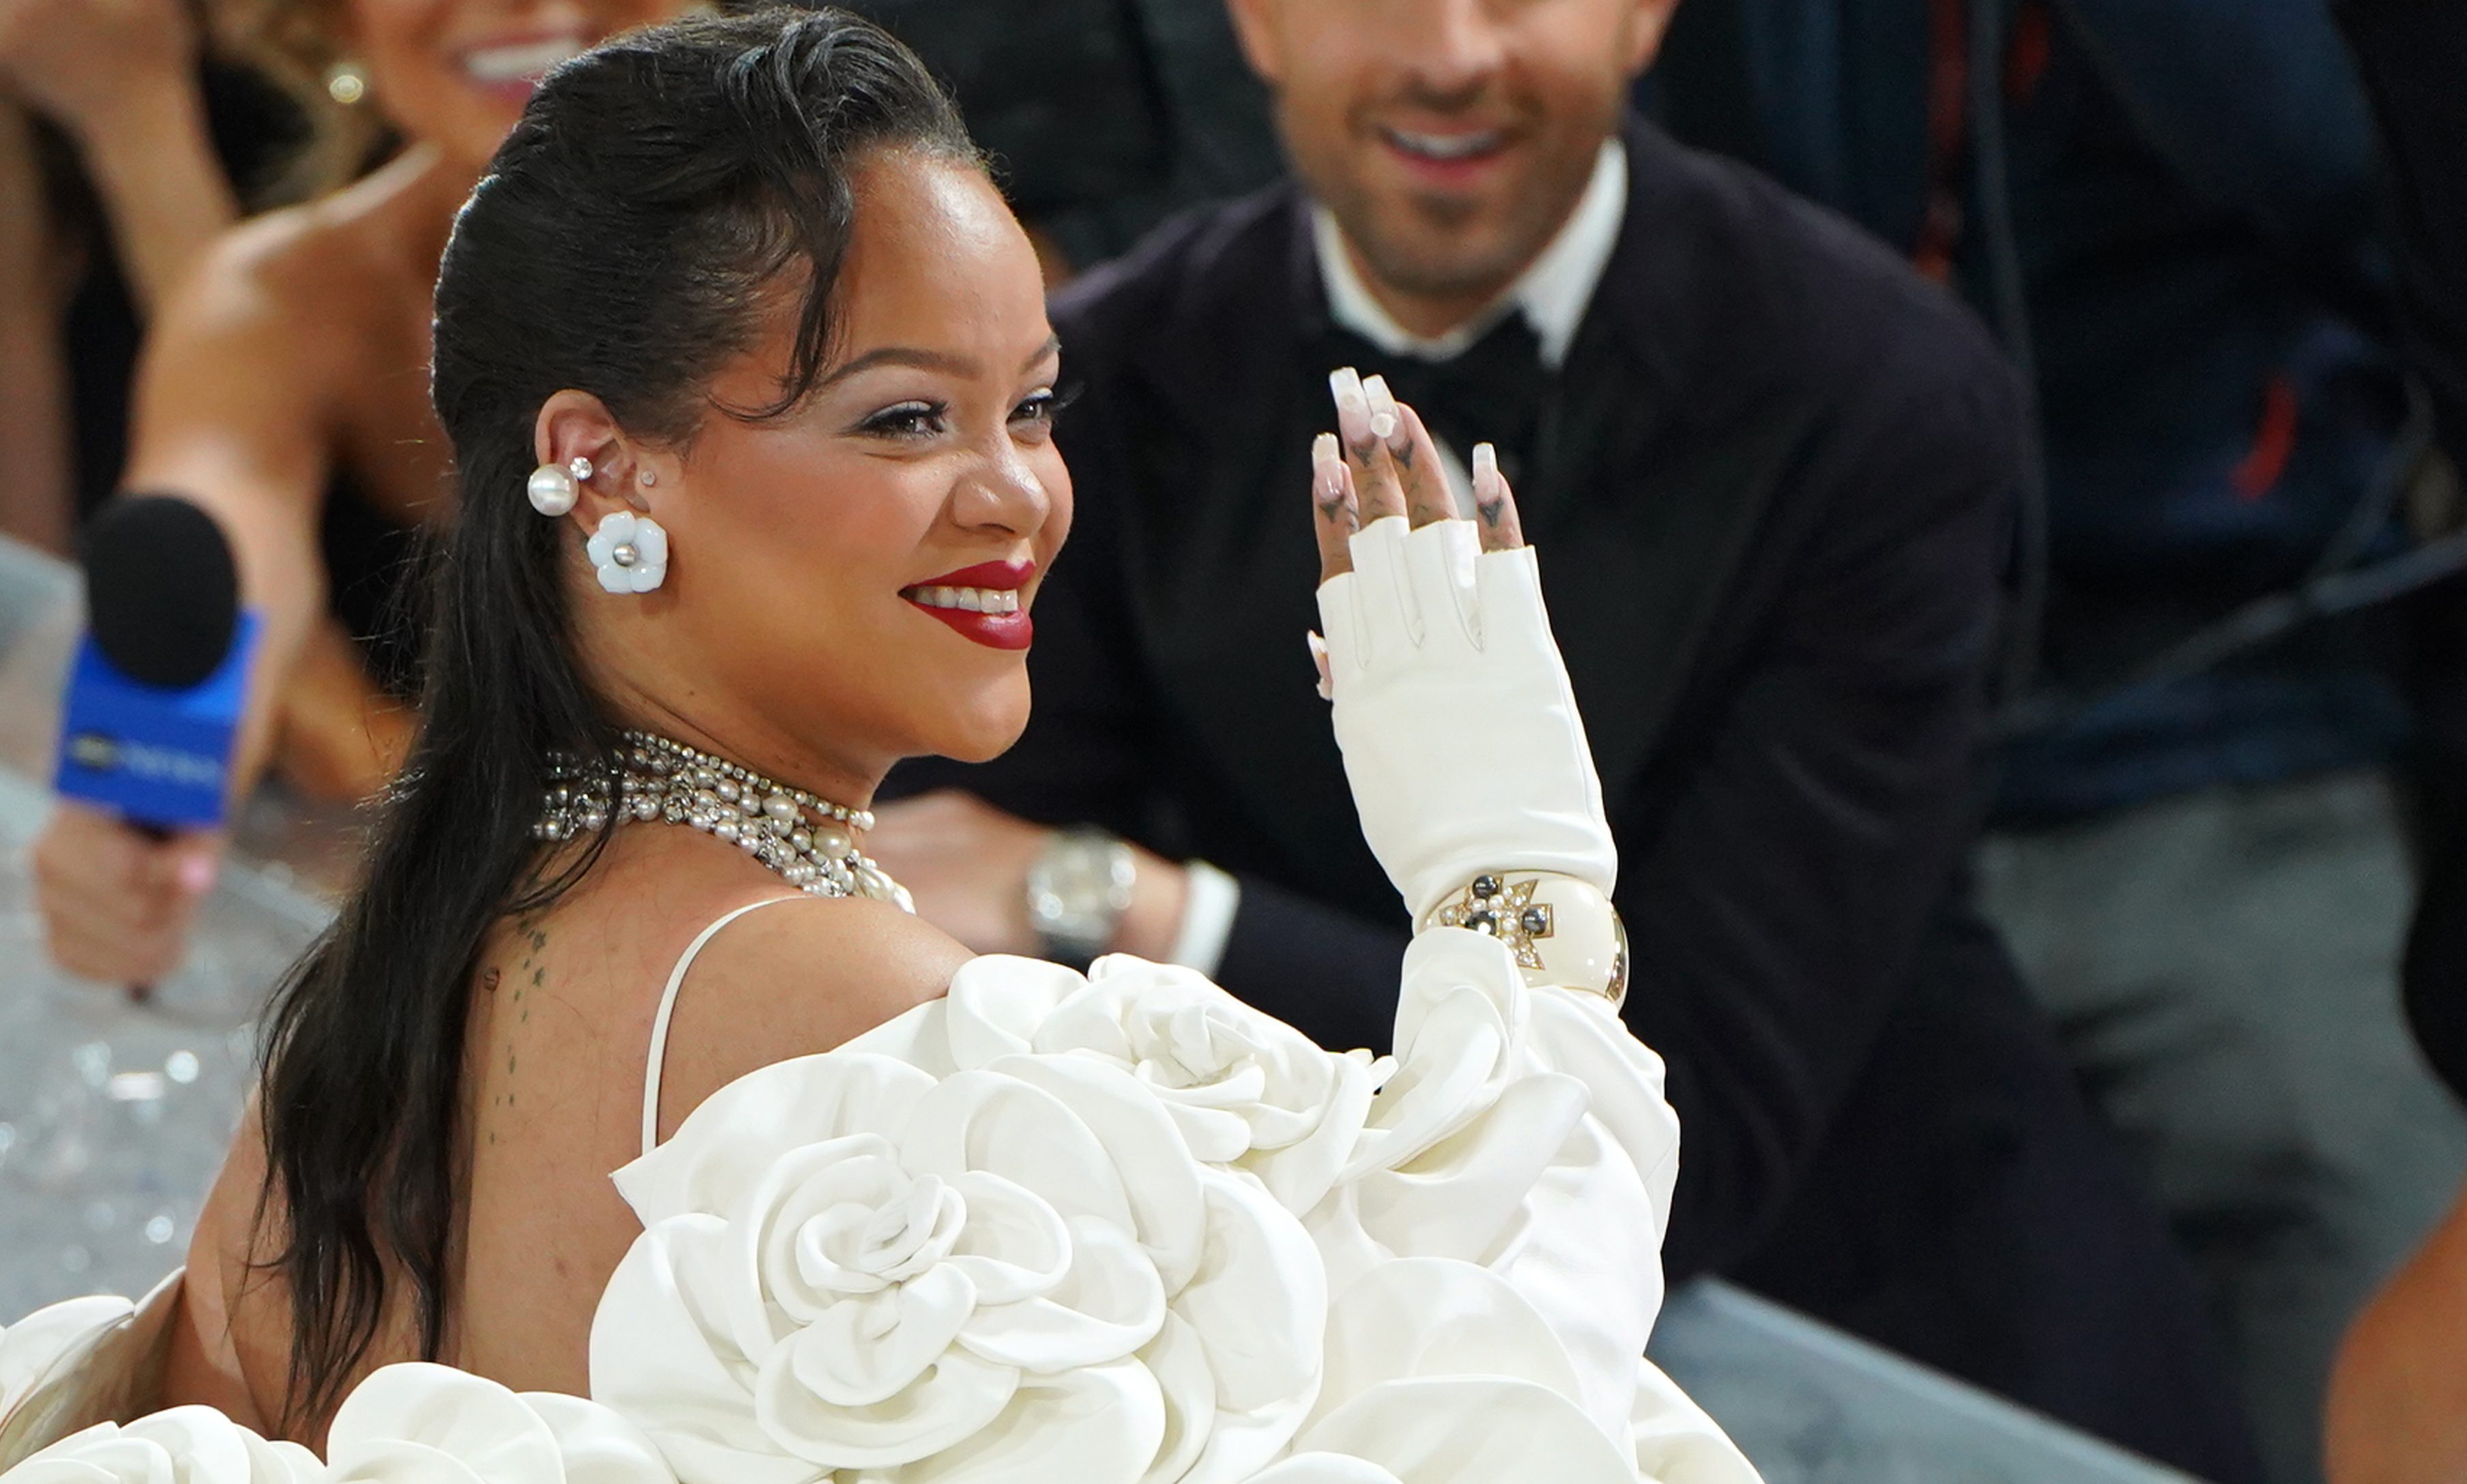 The Chanel Jewelry Story Behind Rihanna's Pregnancy Announcement